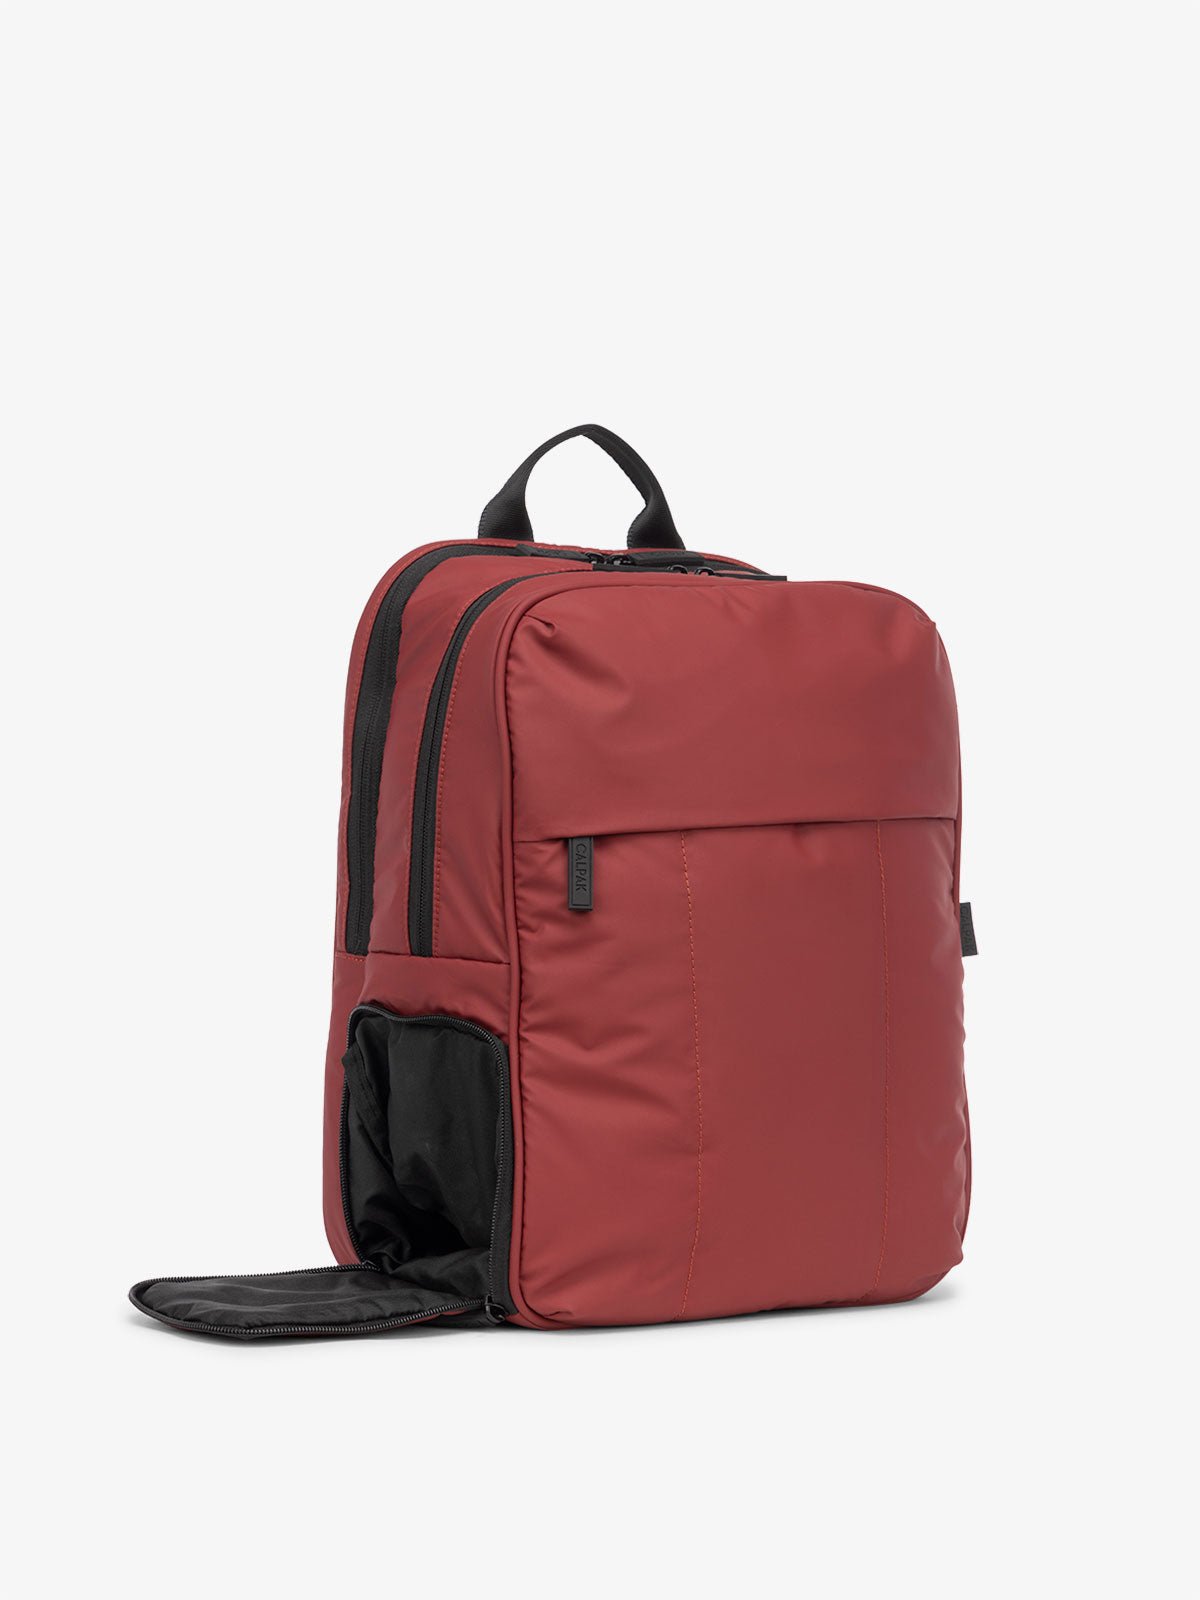 CALPAK Luka Laptop Backpack lightweight with shoe compartment in merlot